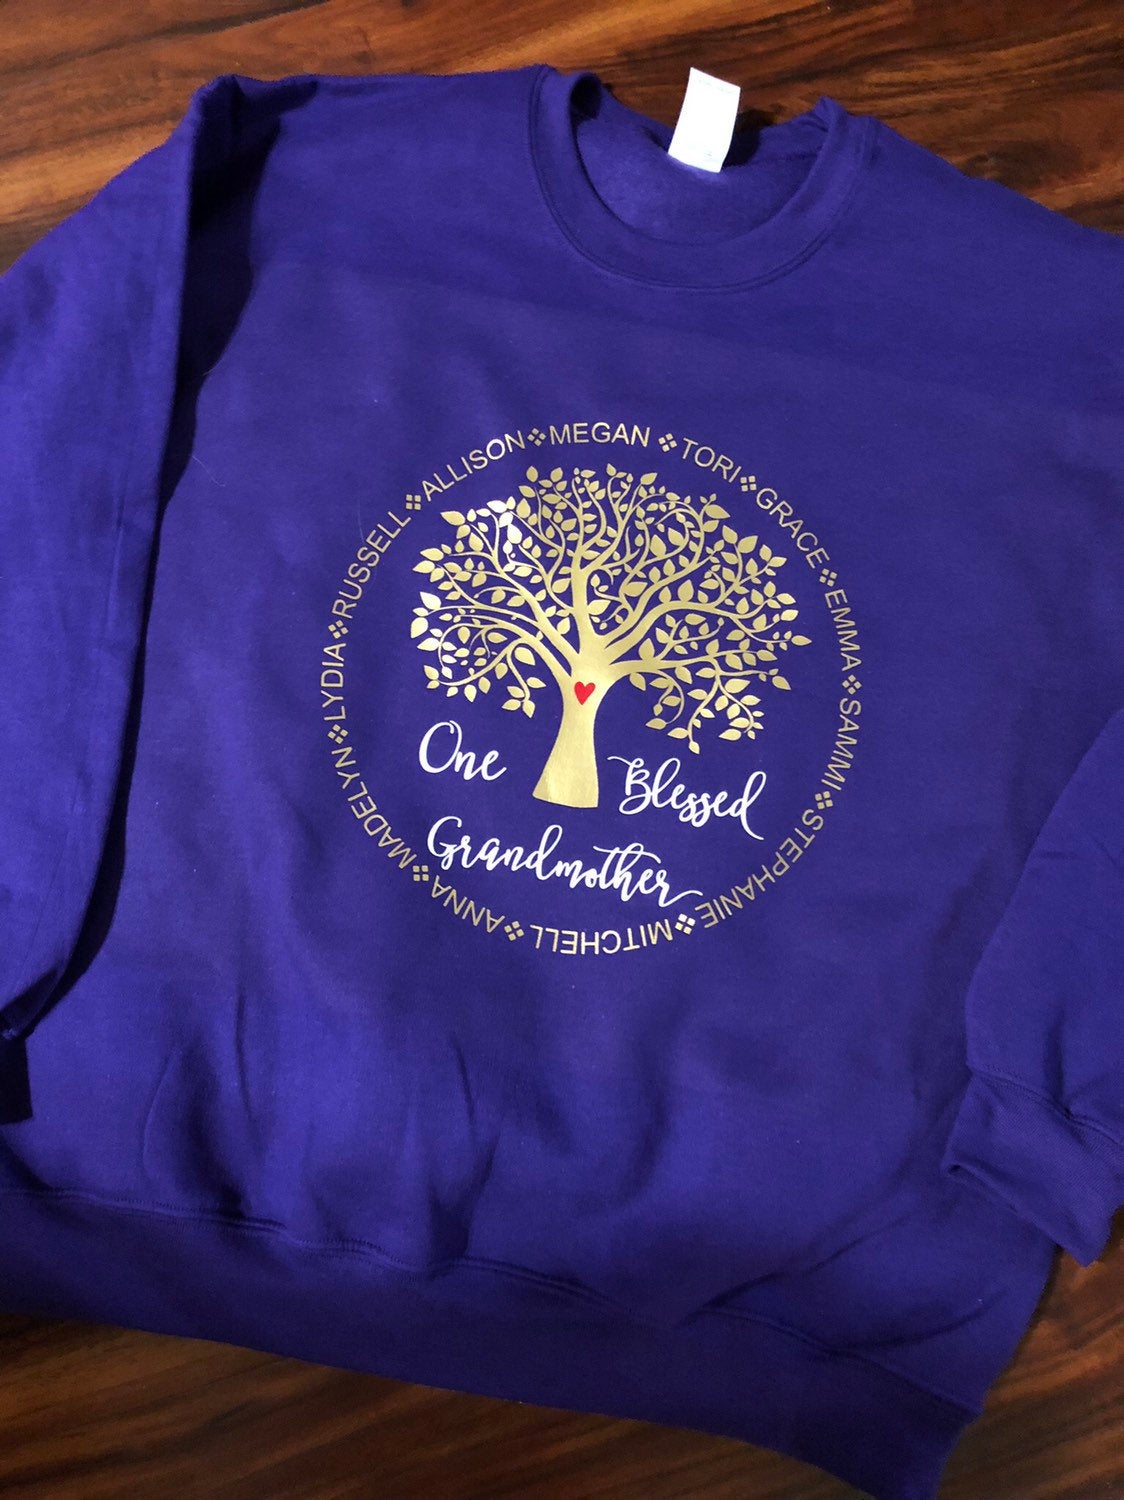 One Blessed Grandmother Tee or Sweater - - Endlessly Trendy Boutique